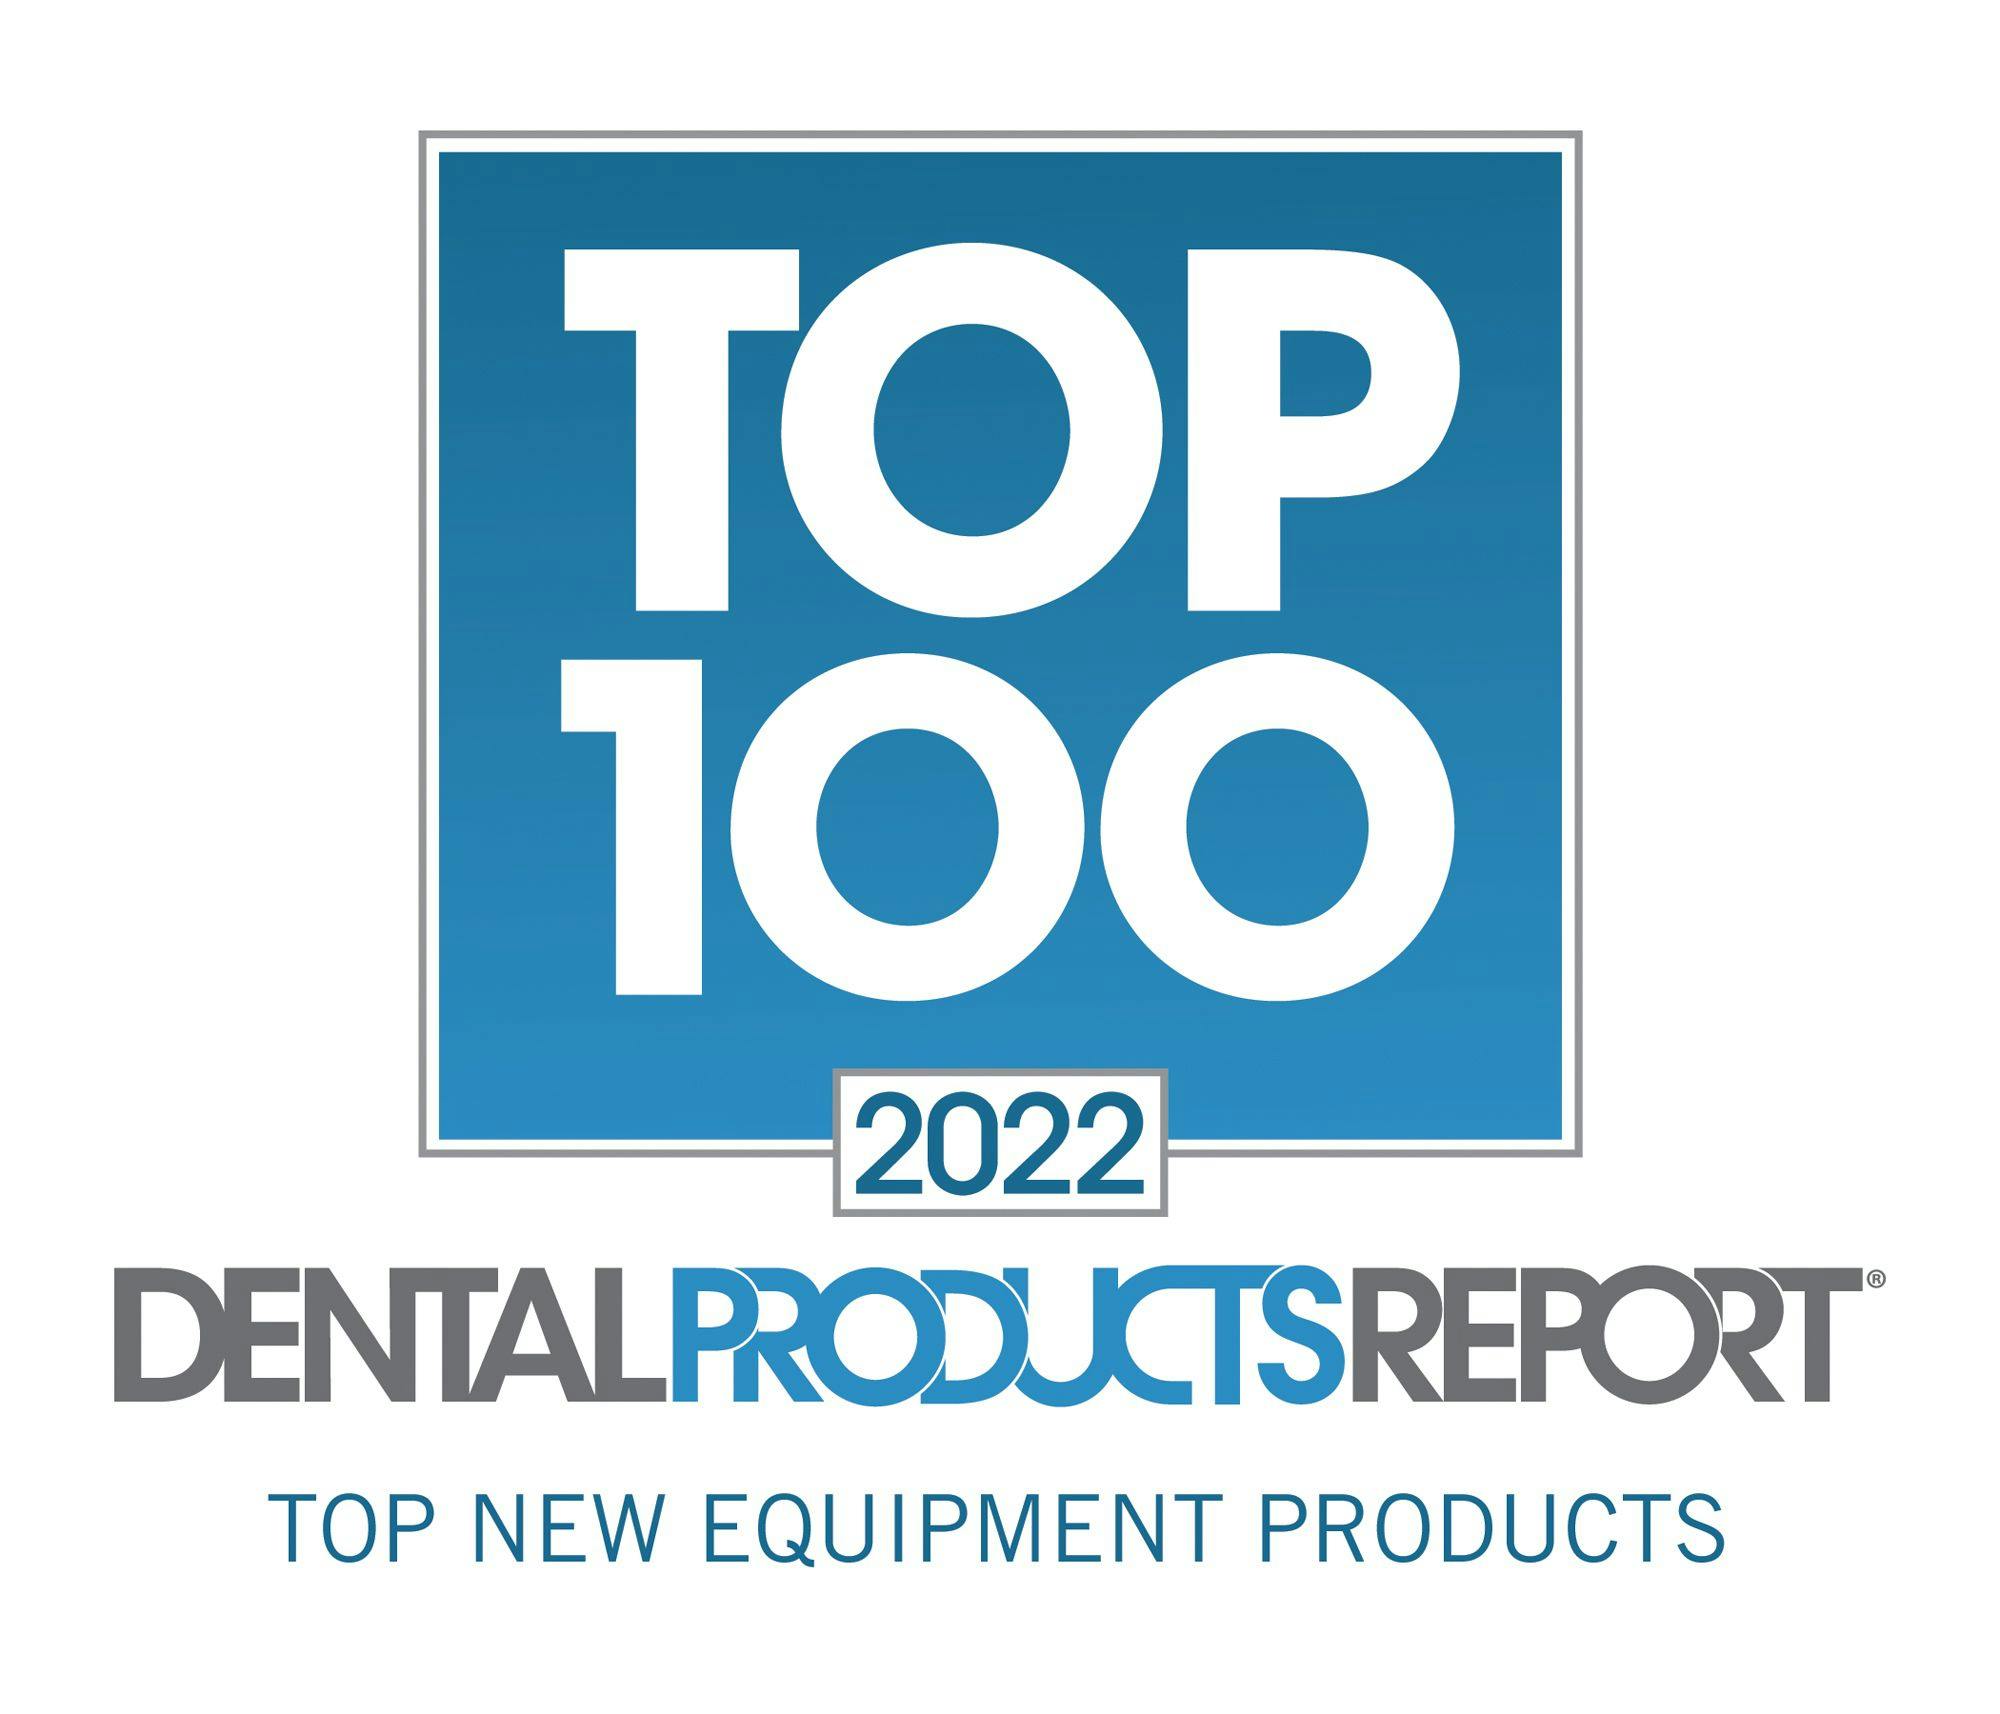 Top 10 Dental Equipment Products of 2022